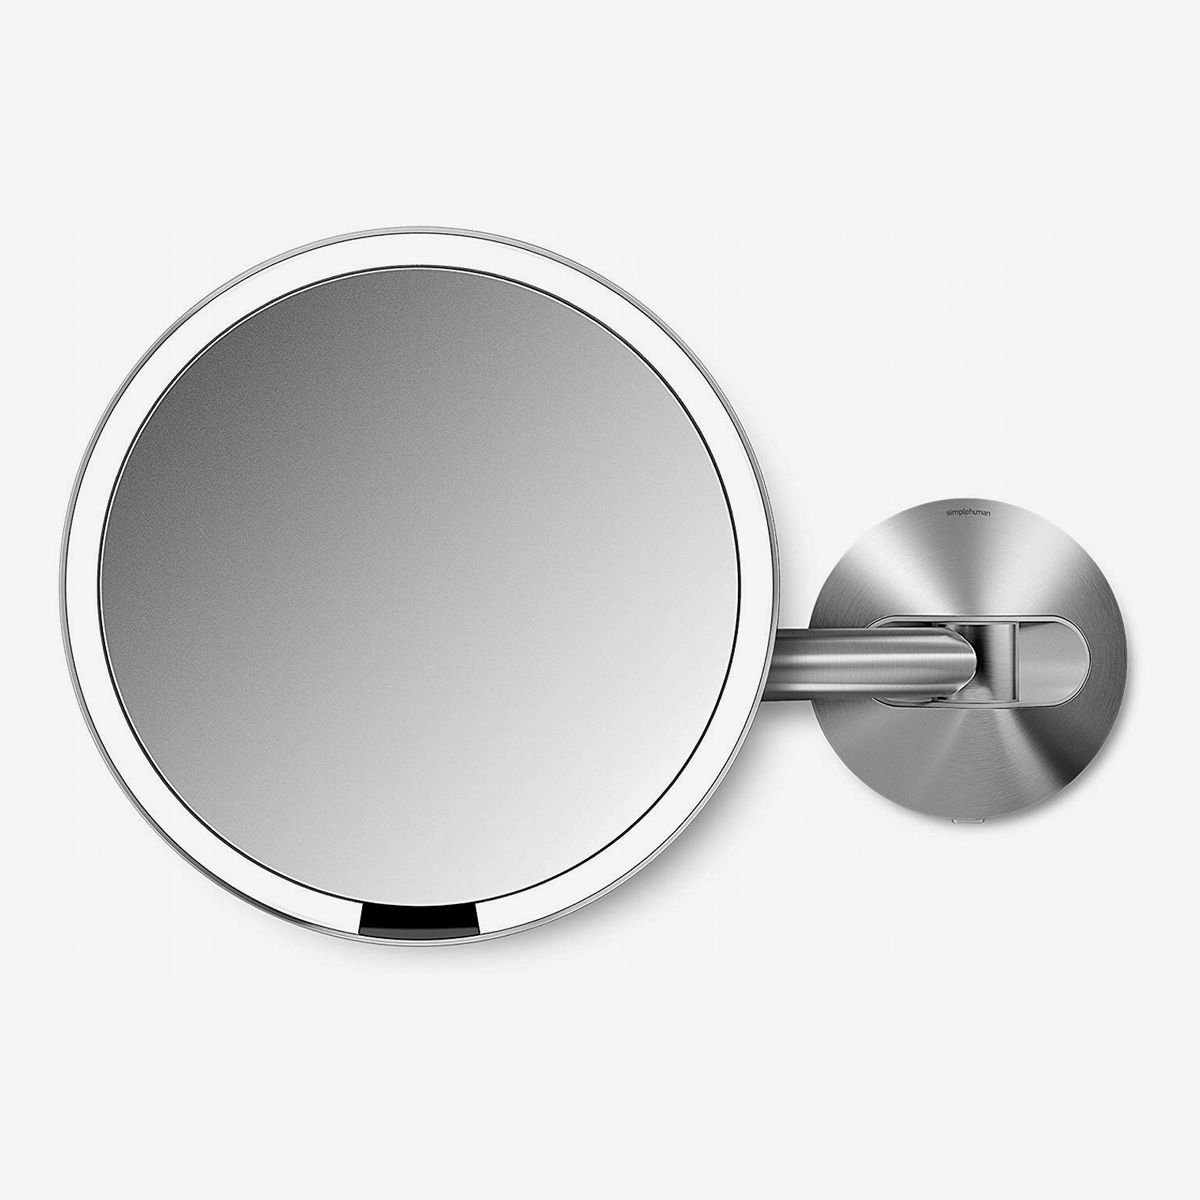 14 Best Lighted Makeup Mirrors 2021, What Is The Best Wall Mounted Lighted Makeup Mirror